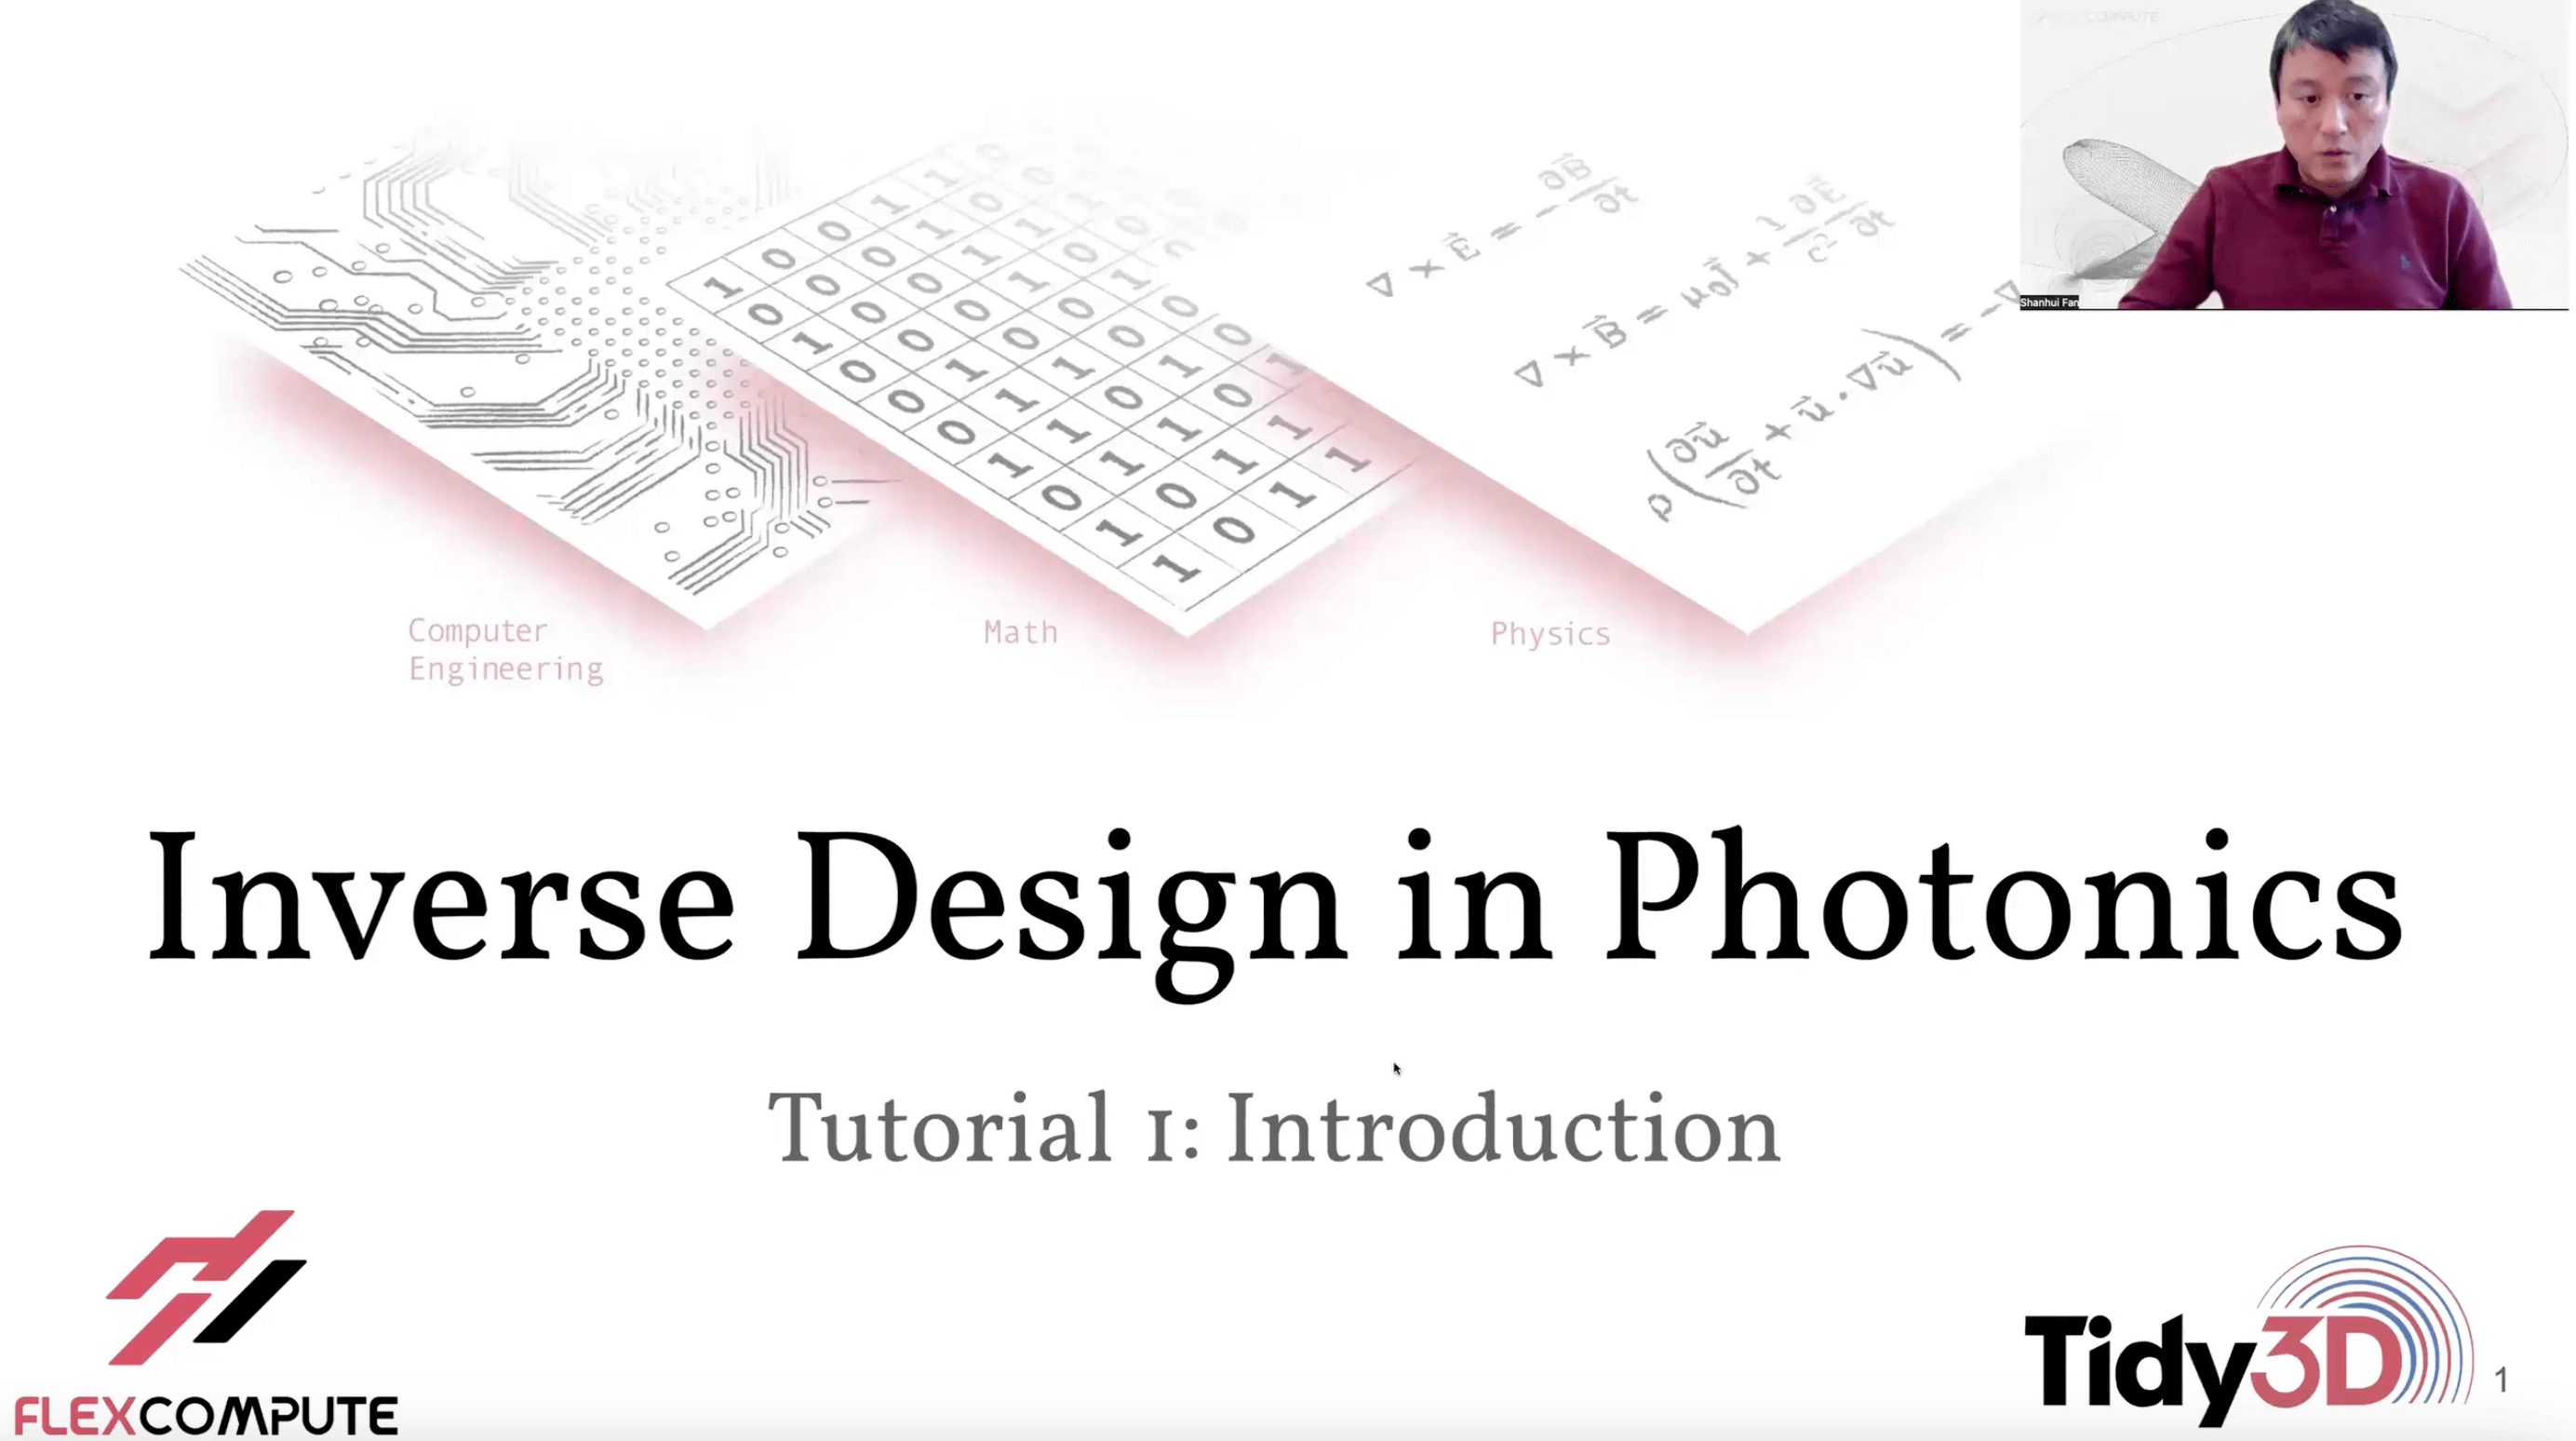 Introduction to Inverse Design in Photonics: Lecture 1 | Flexcompute